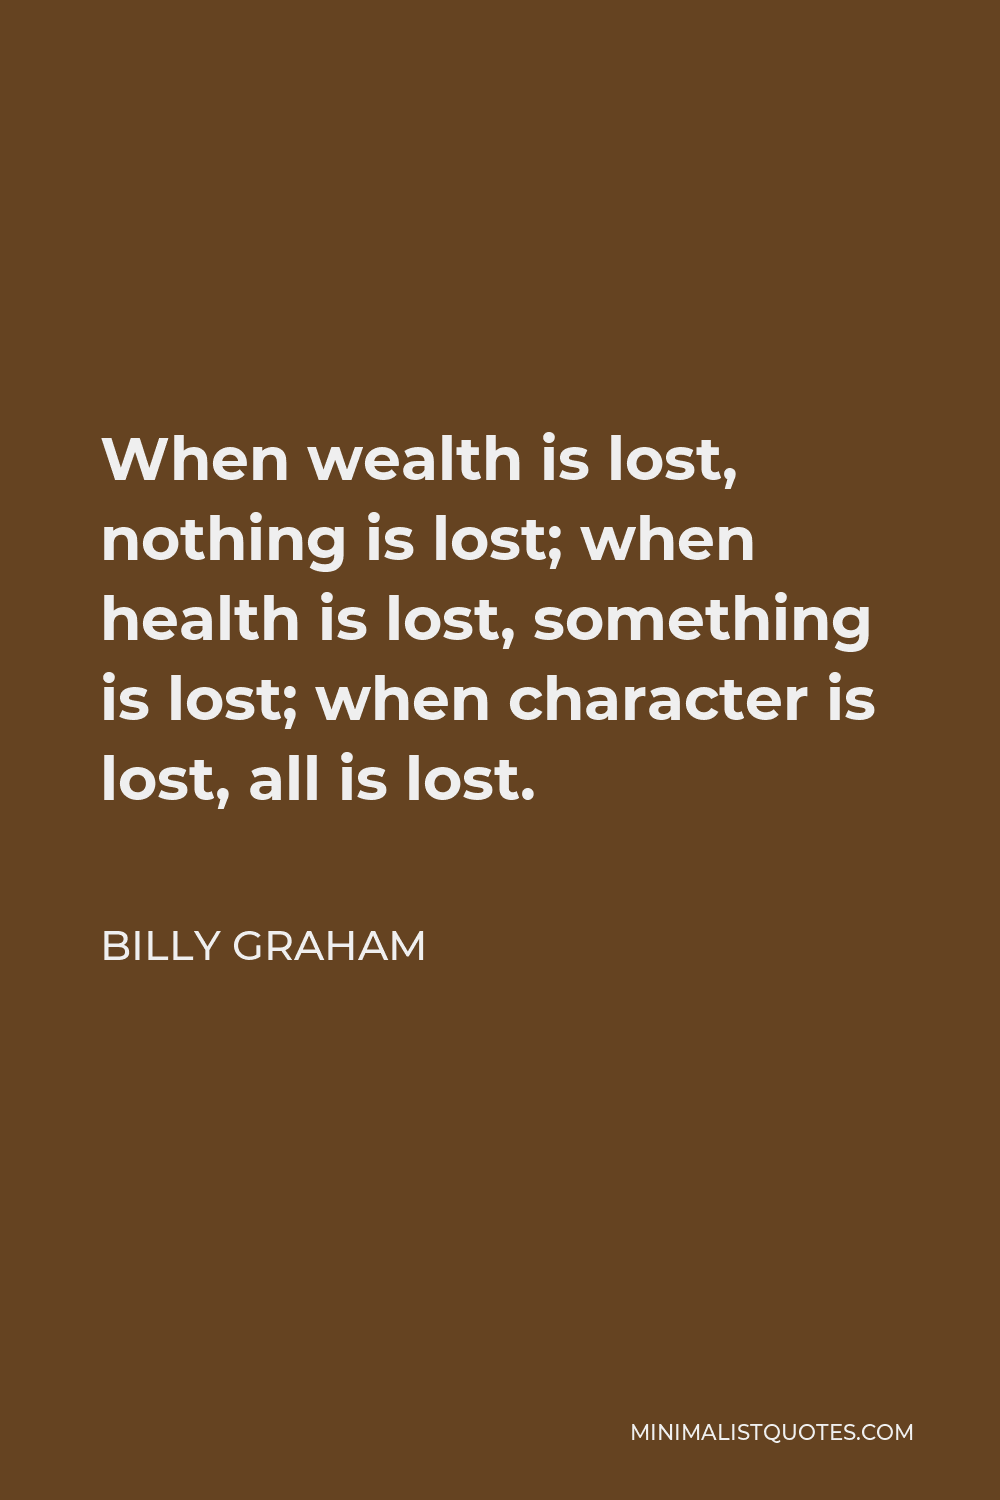 Billy Graham Quote - When wealth is lost, nothing is lost; when health is lost, something is lost; when character is lost, all is lost.